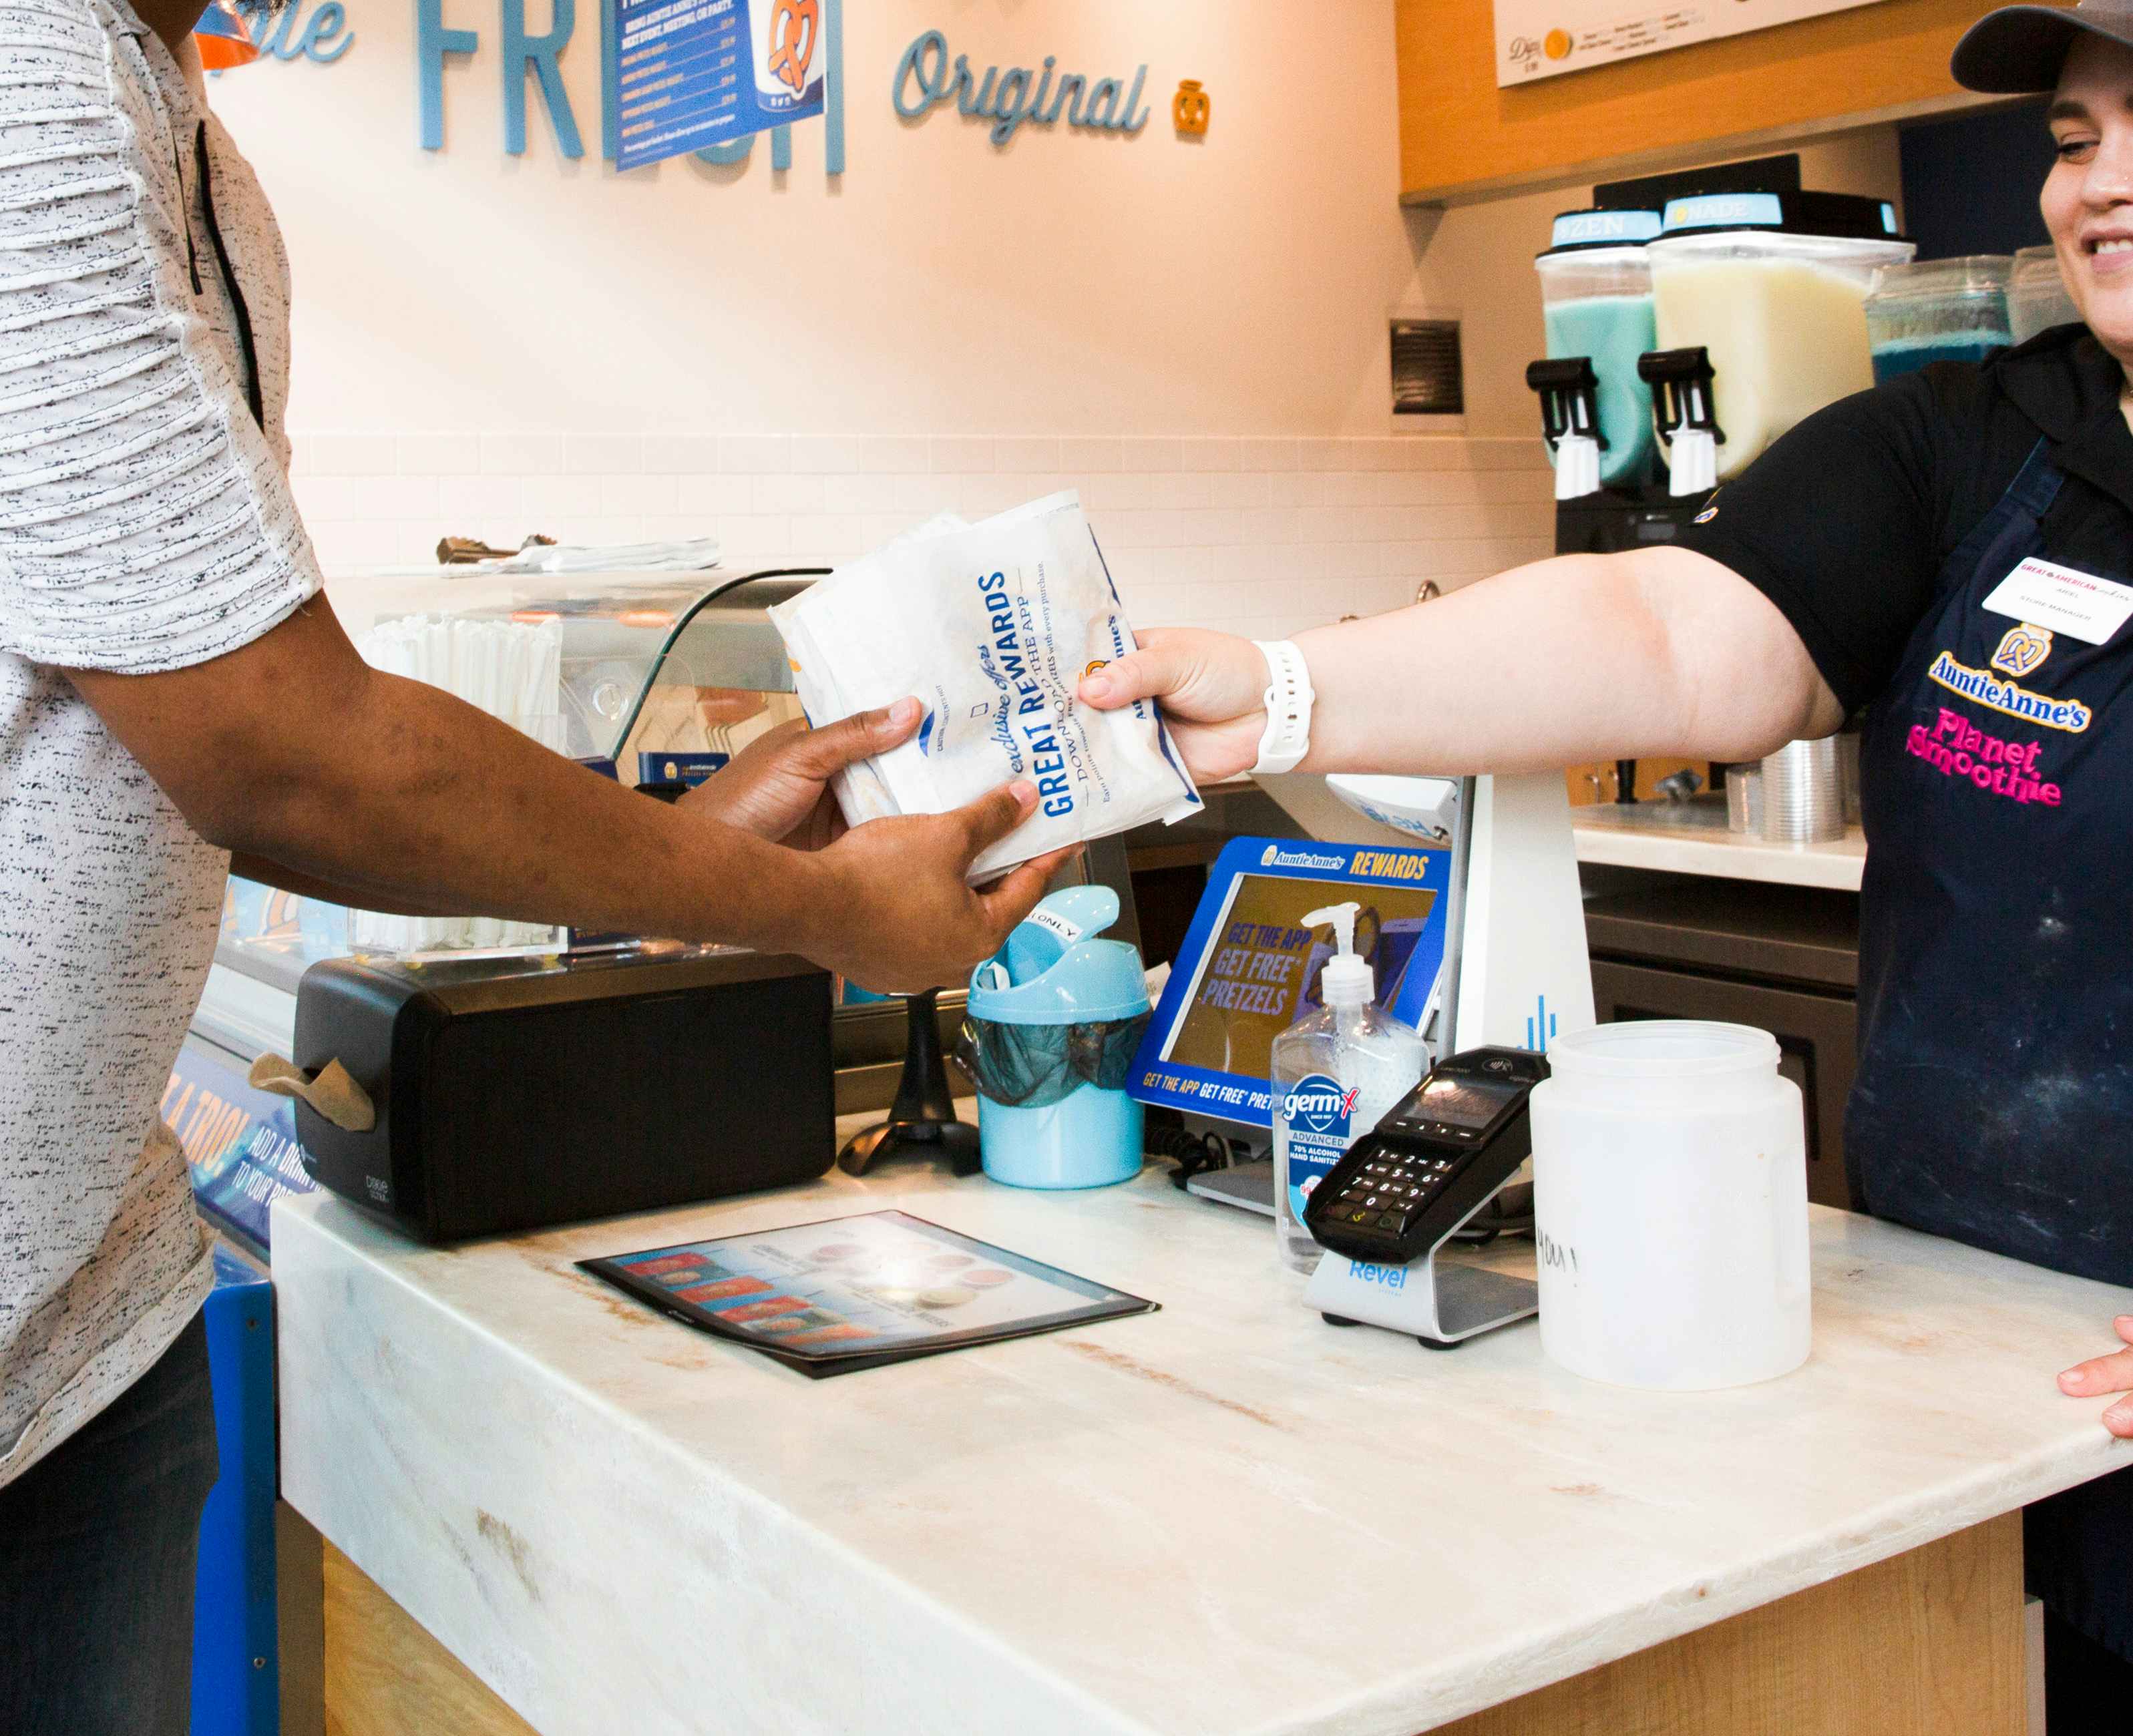 Auntie Anne's Pretzel being handed to a customer from an employee